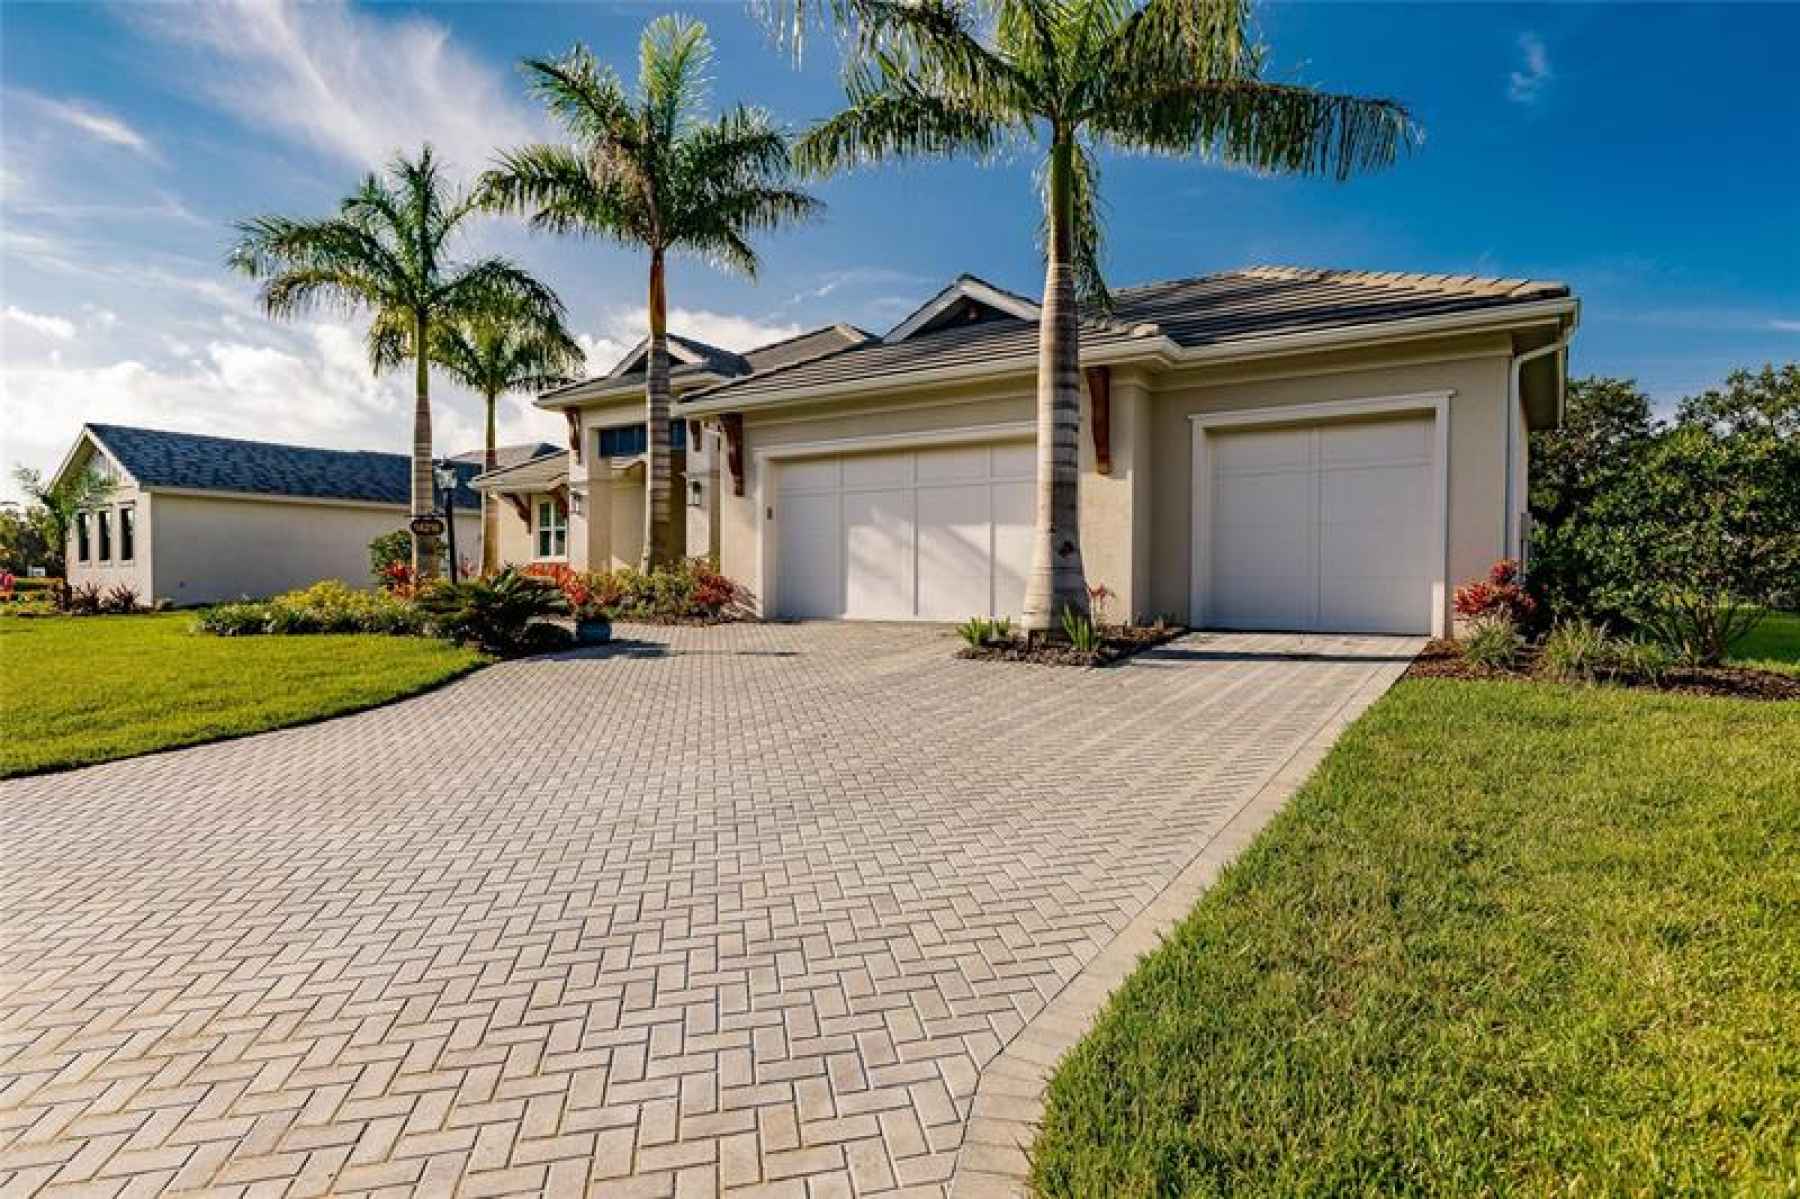 paver driveway and over sized 3 car garage